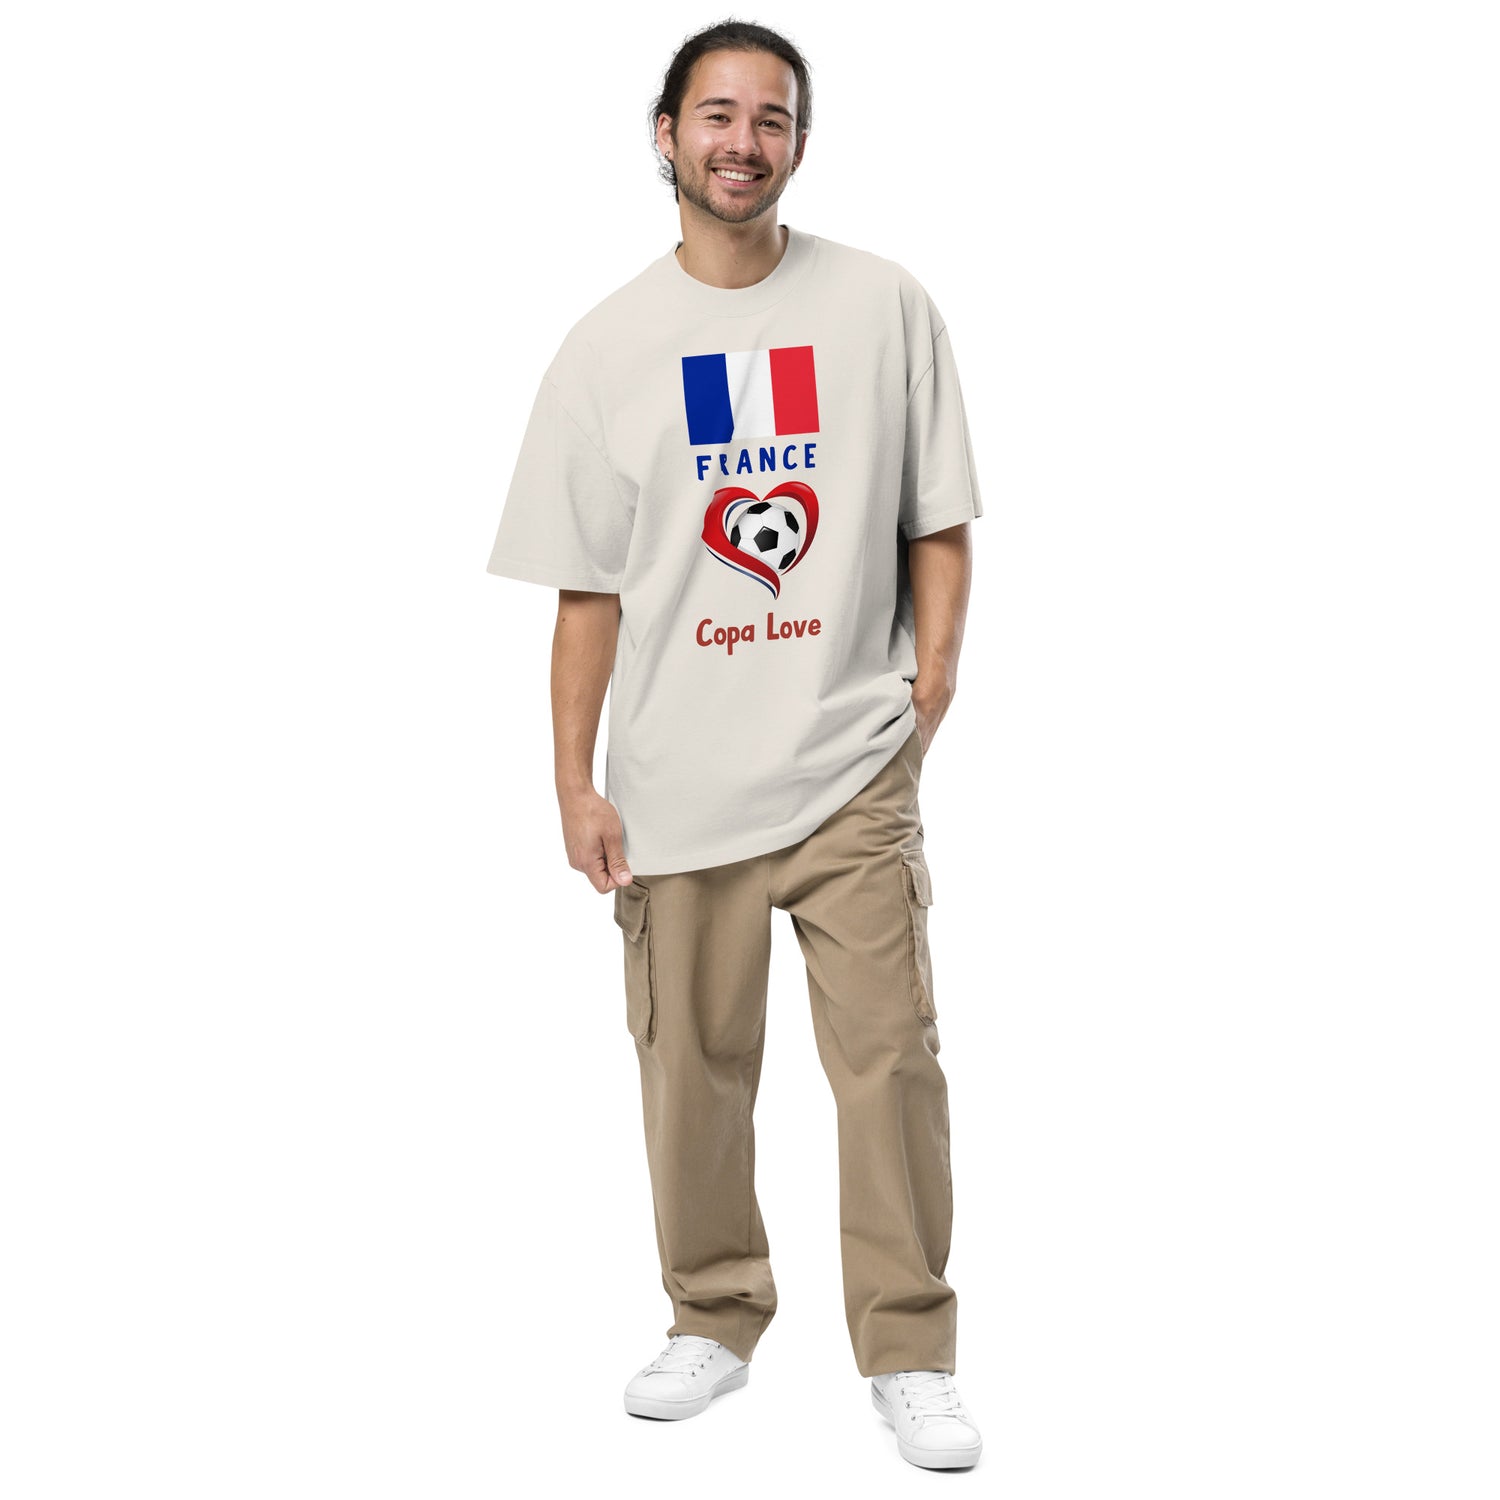 FRANCE - Copa Love unisex oversized faded t-shirt